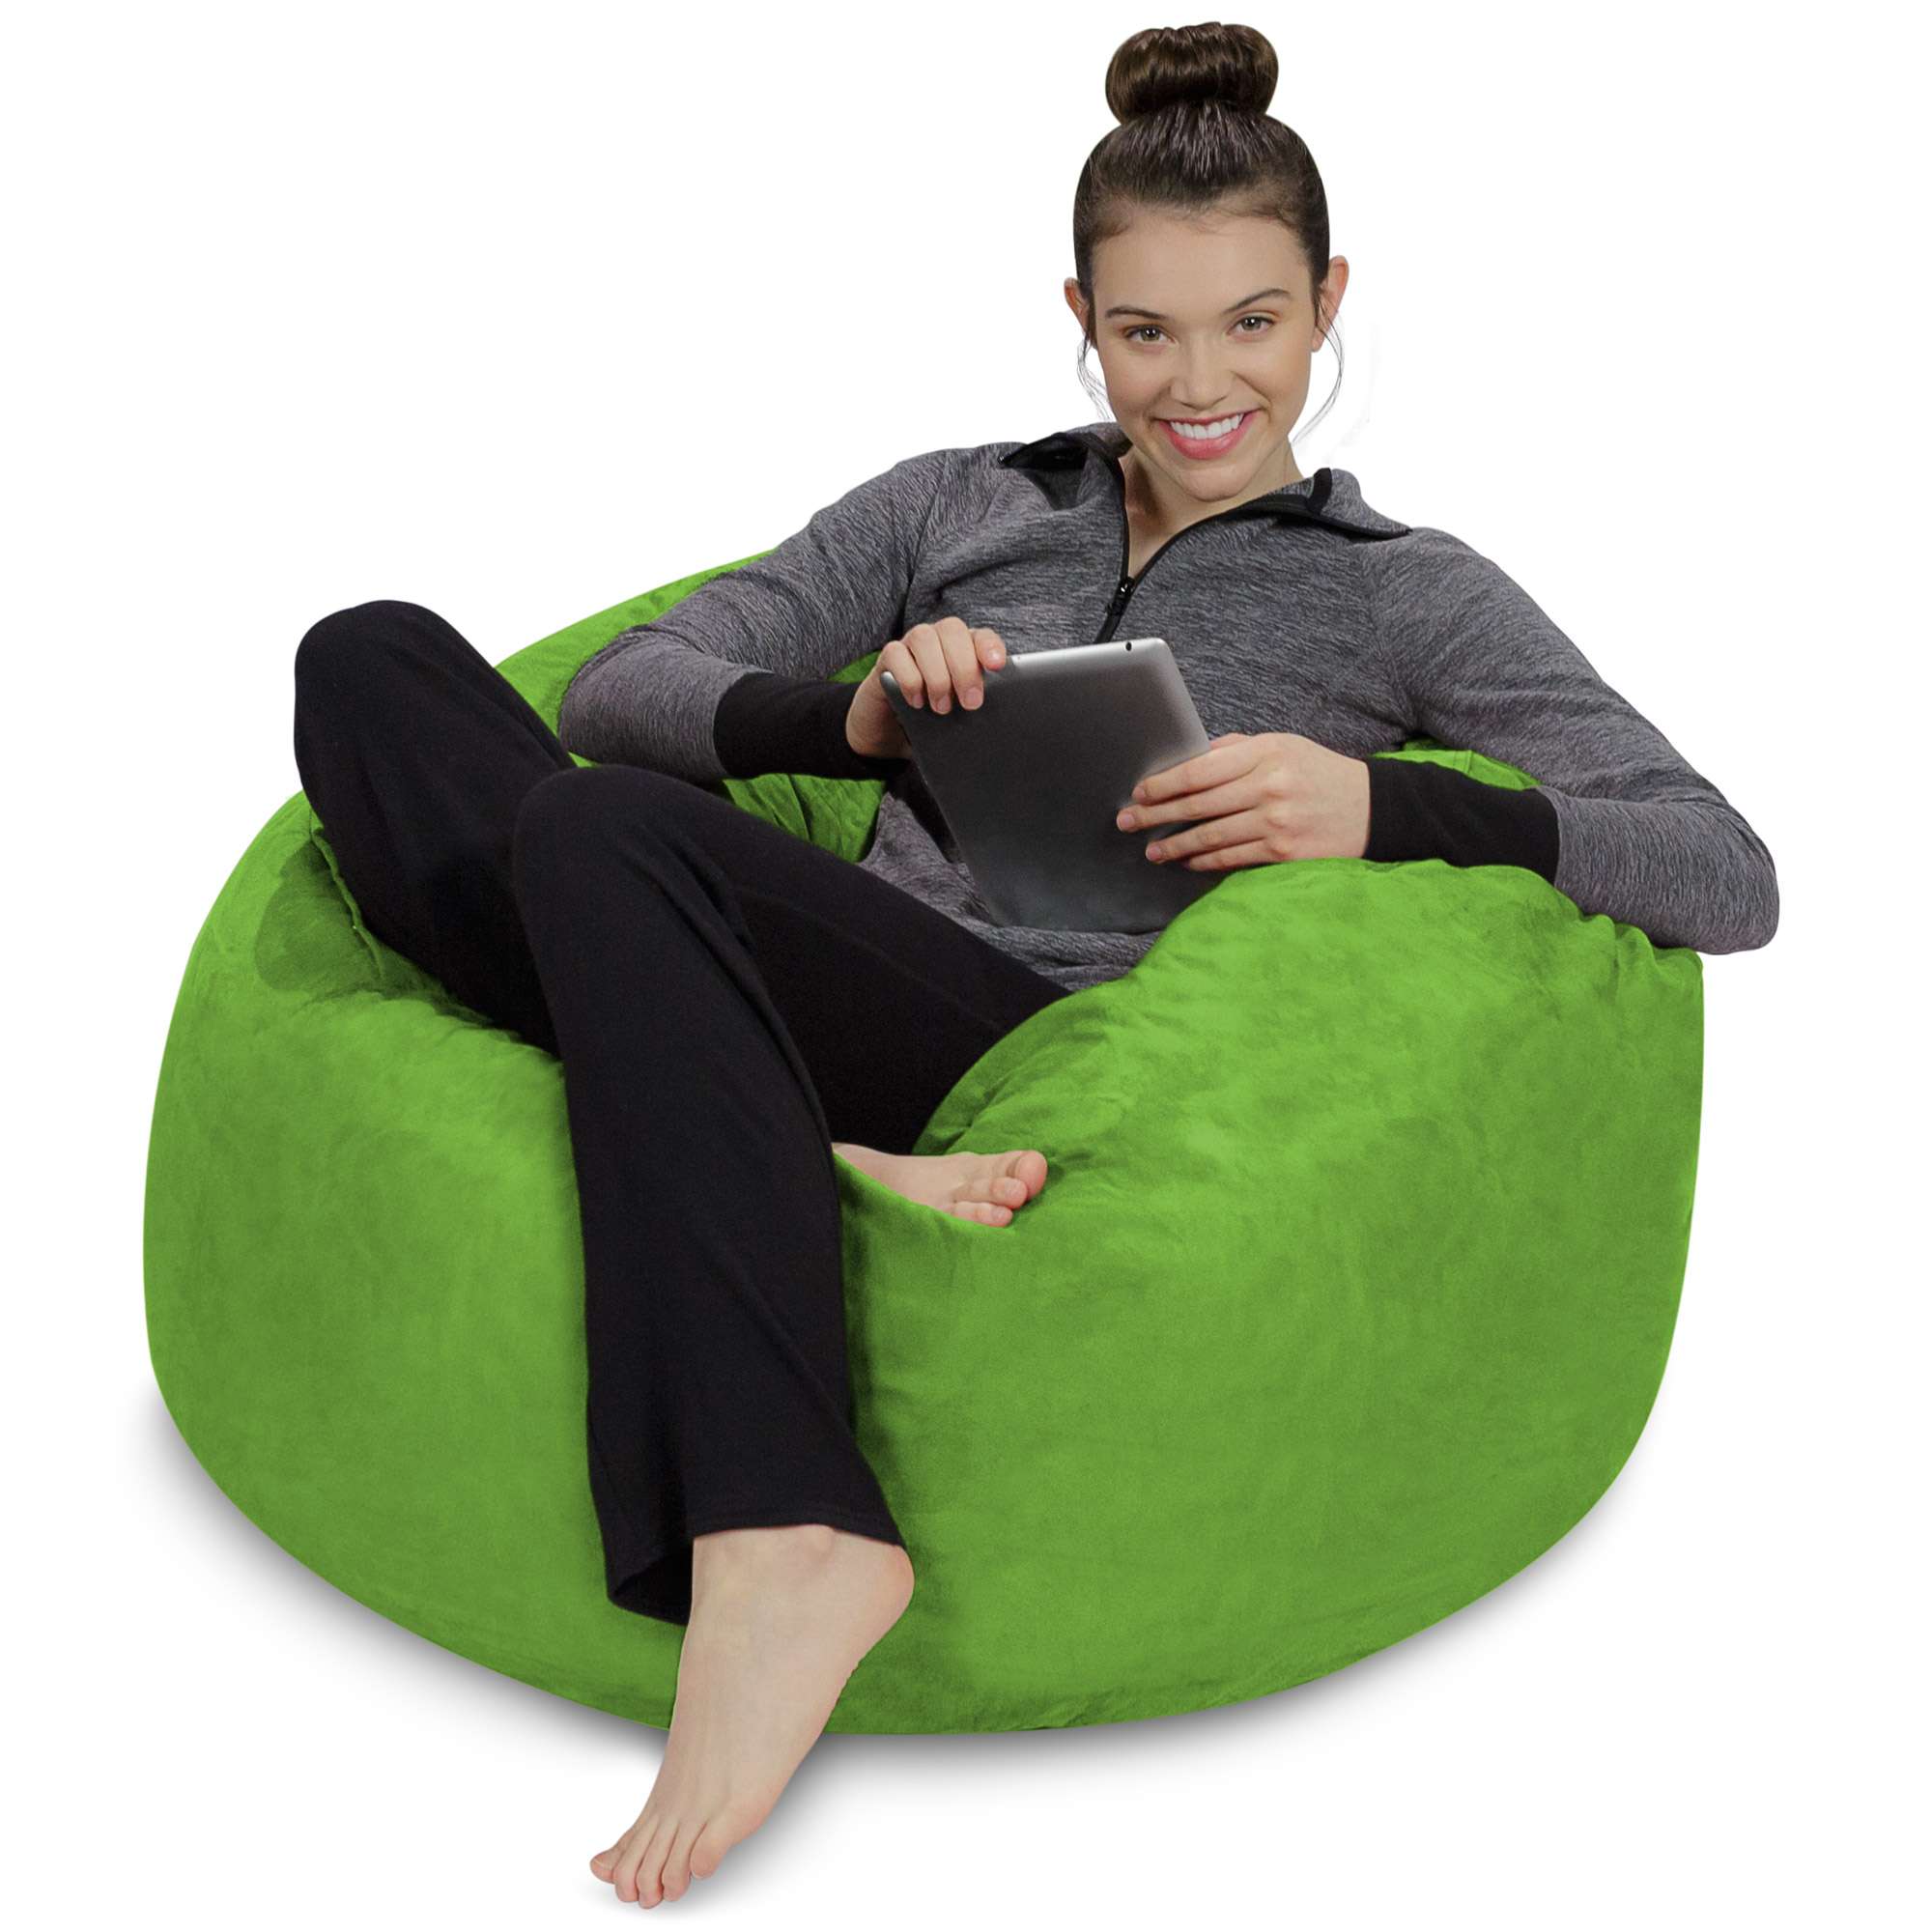 Sofa Sack Bean Bag Chair, Memory Foam Lounger with Microsuede Cover, Kids, 3 ft, Lime - image 2 of 5